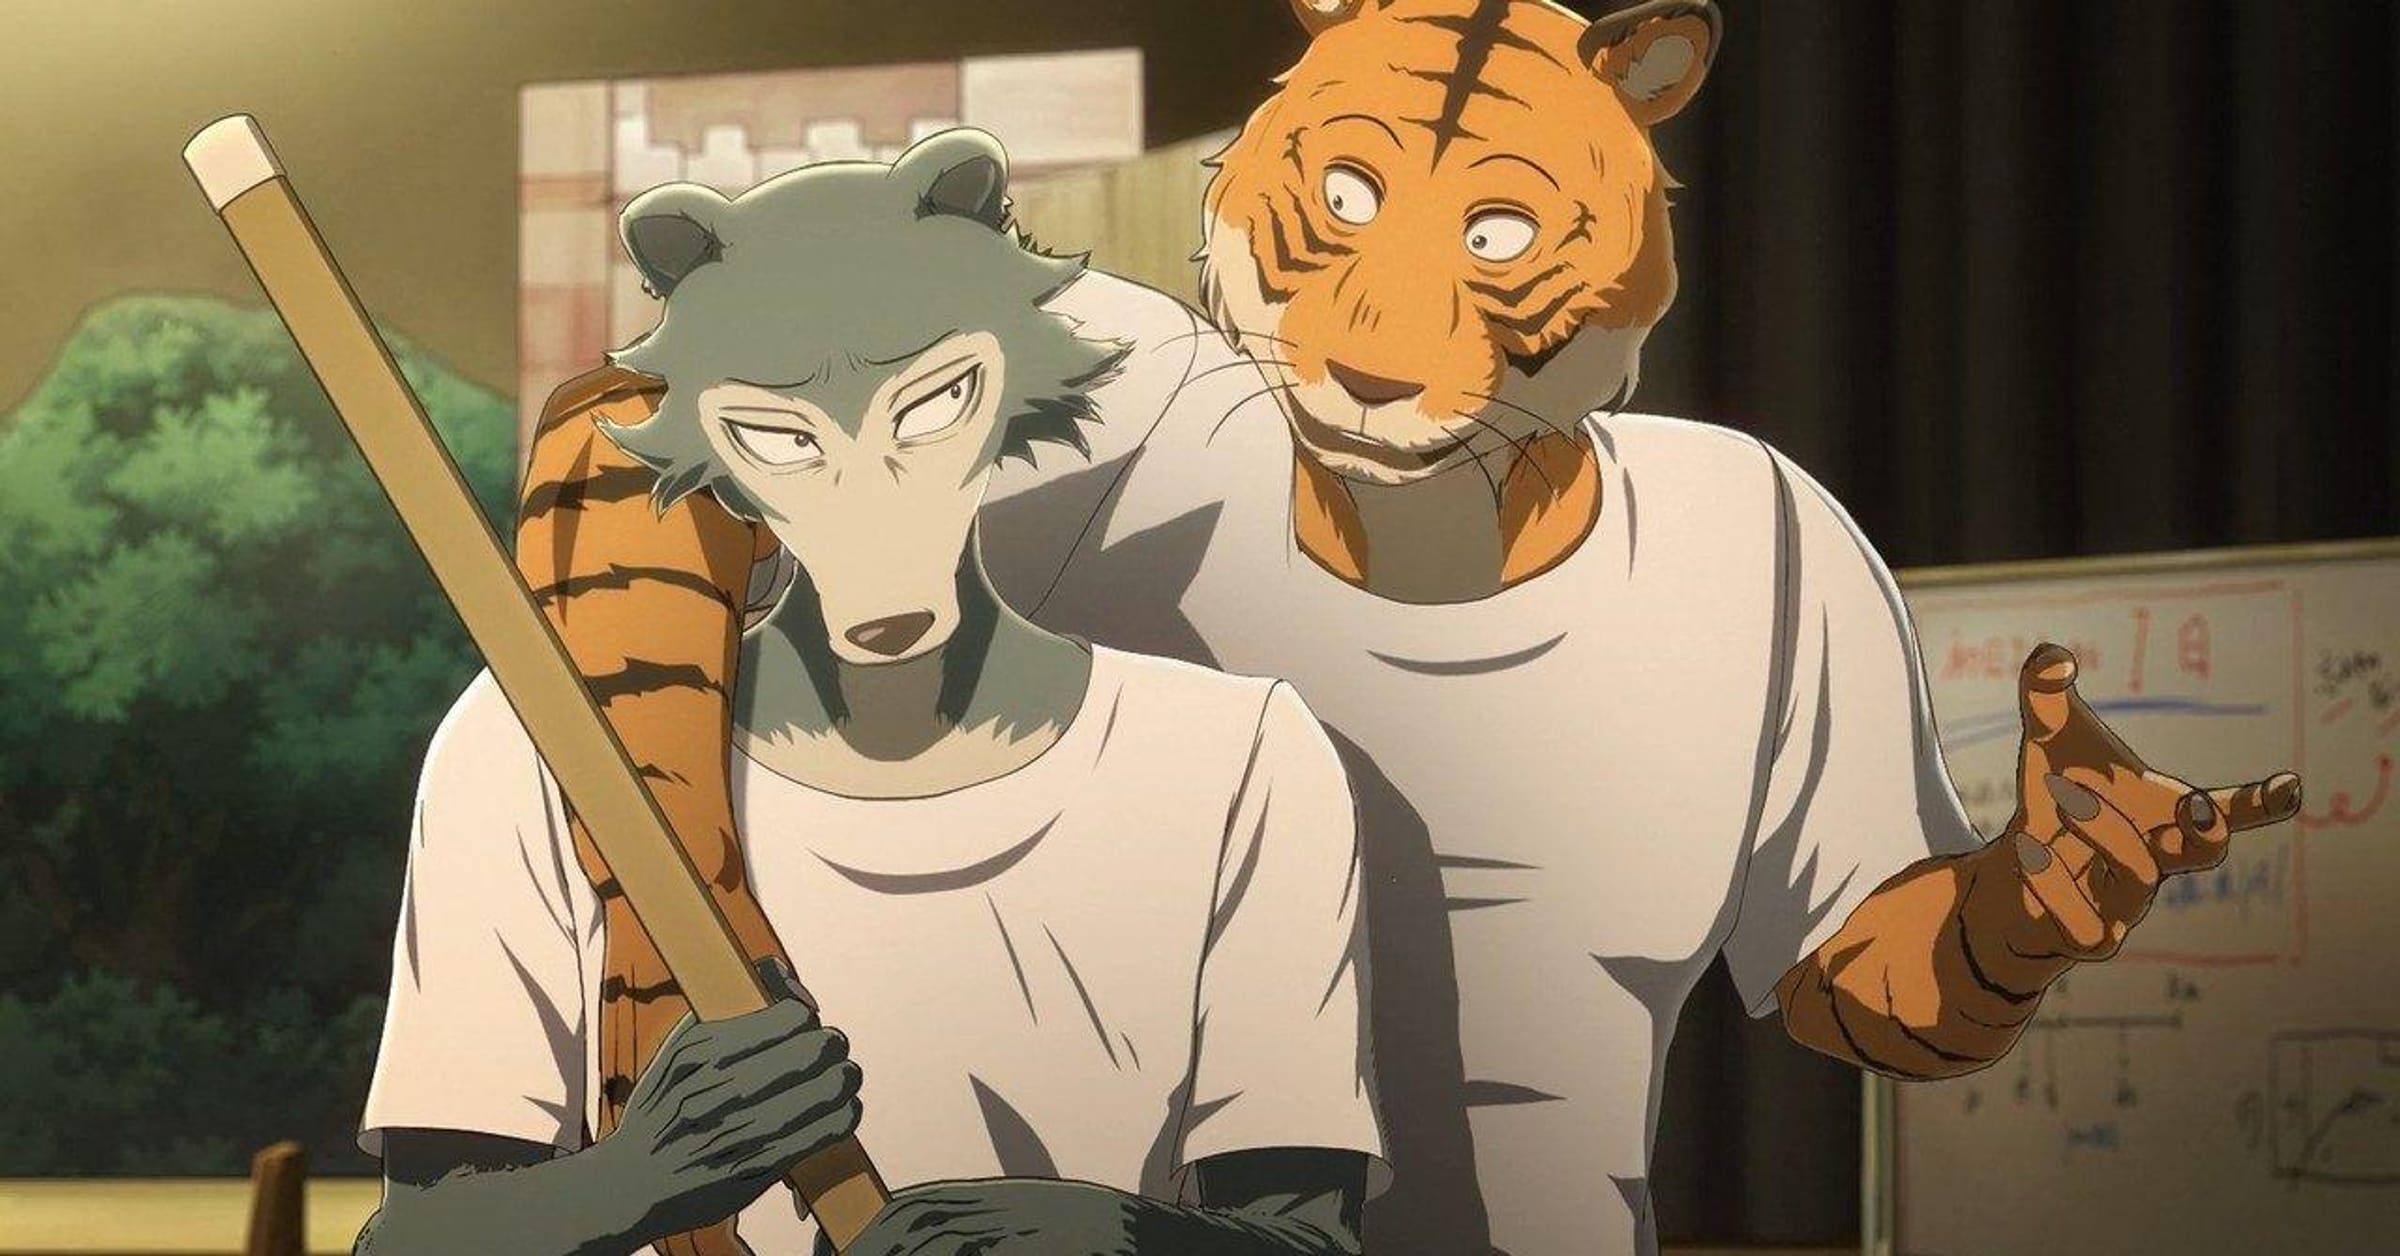 Beastars: 10 Anime To Watch If You Loved It